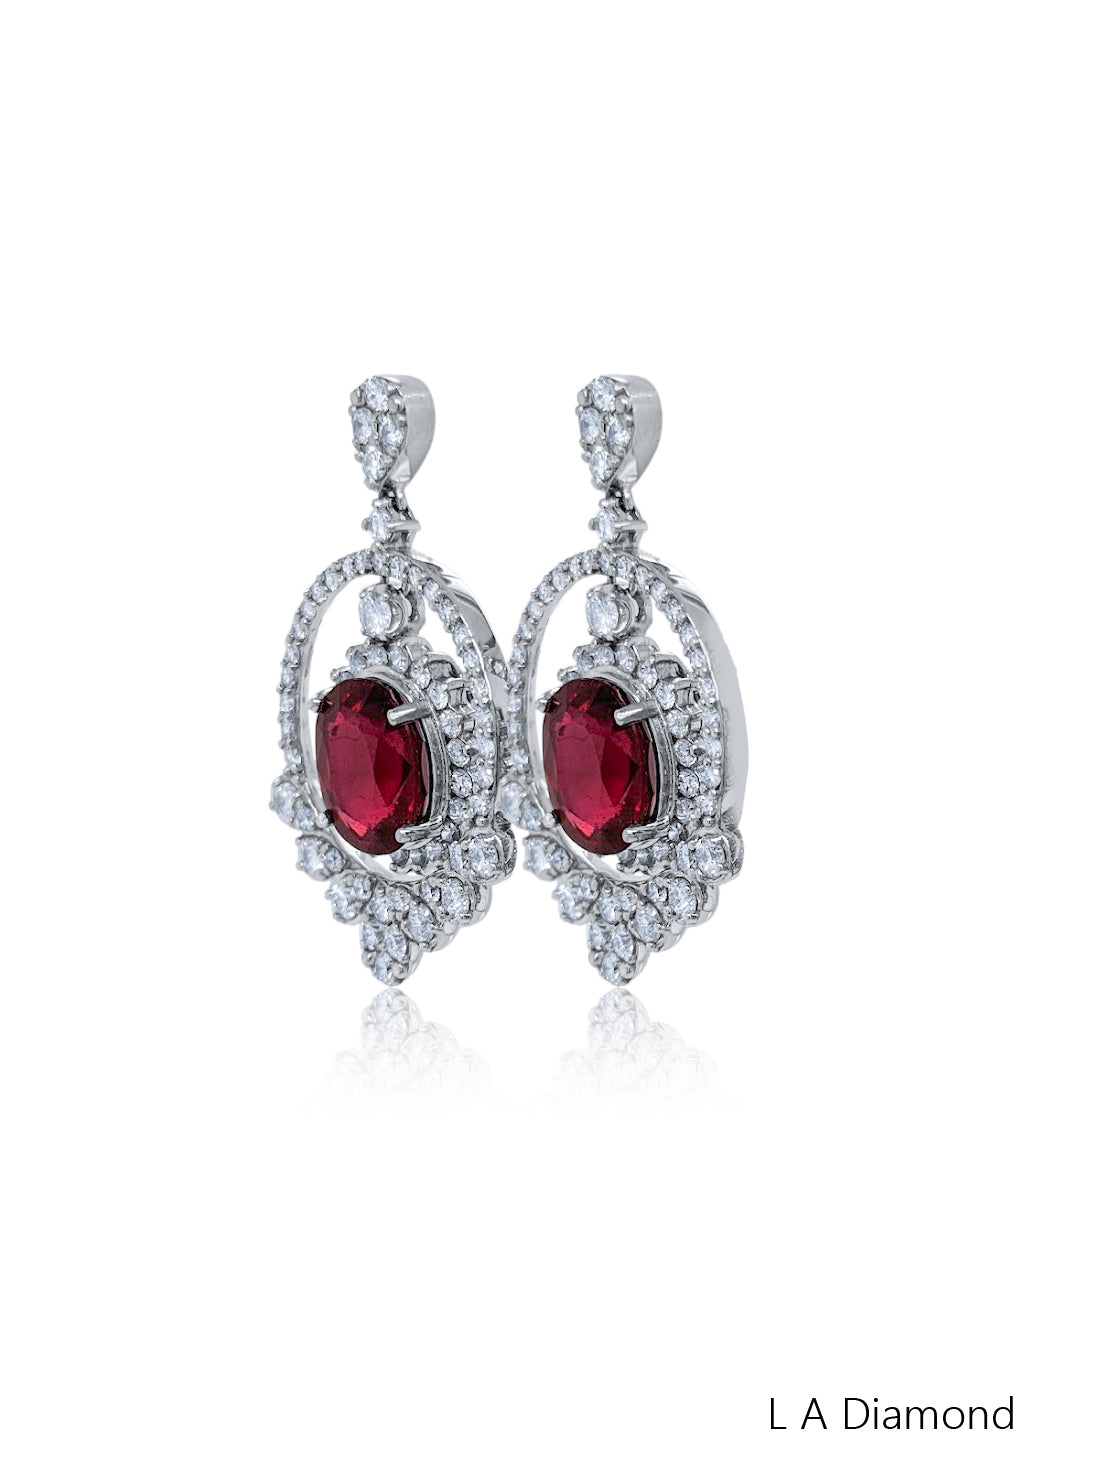 14k White Gold Diamond Round Cut Dangling Earring With Ruby 4.49c